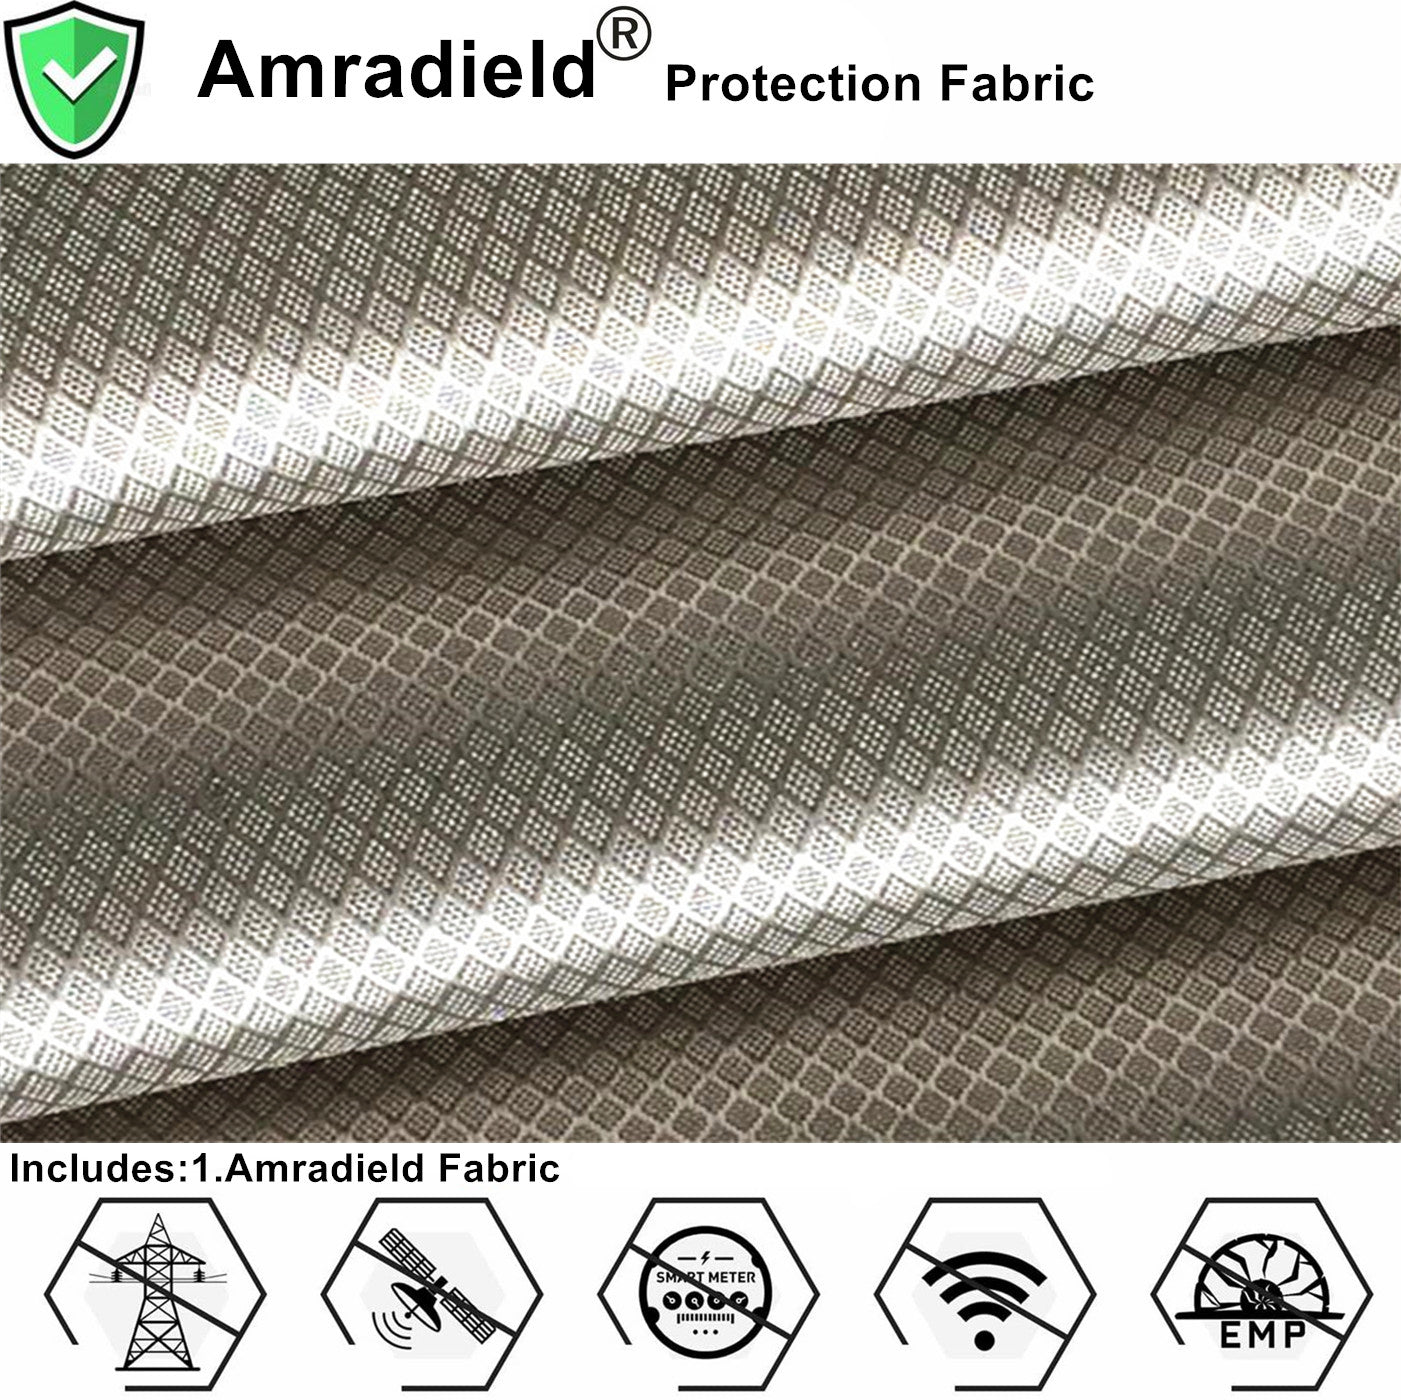 Anti radiation Fabric for Clothing Silver Fiber Fabric Material in